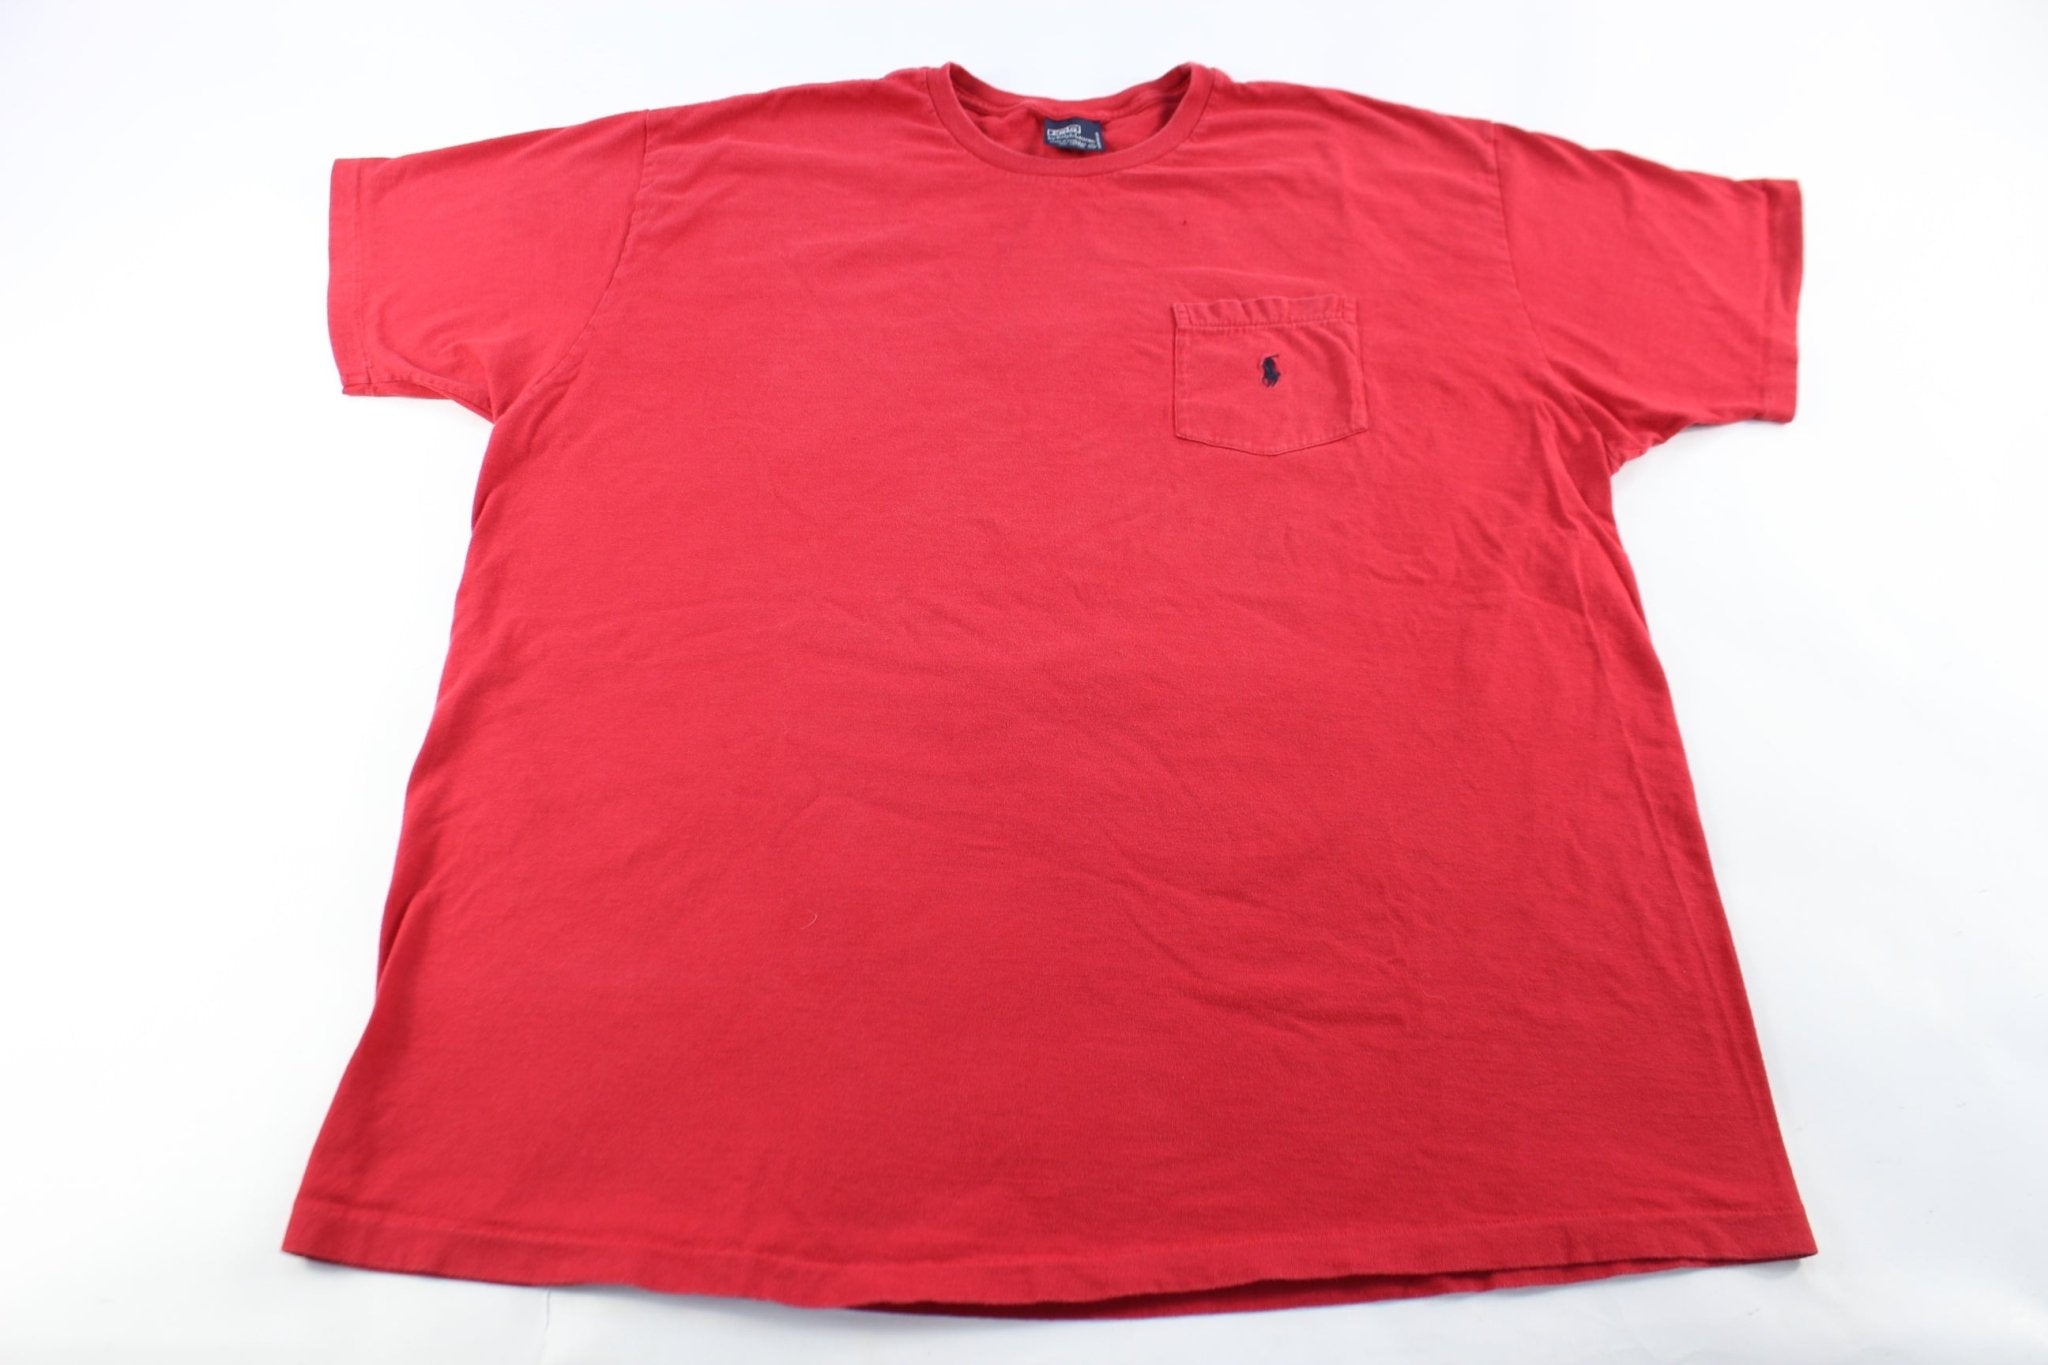 Polo by Ralph Lauren Embroidered Logo Red T-Shirt - ThriftedThreads.com